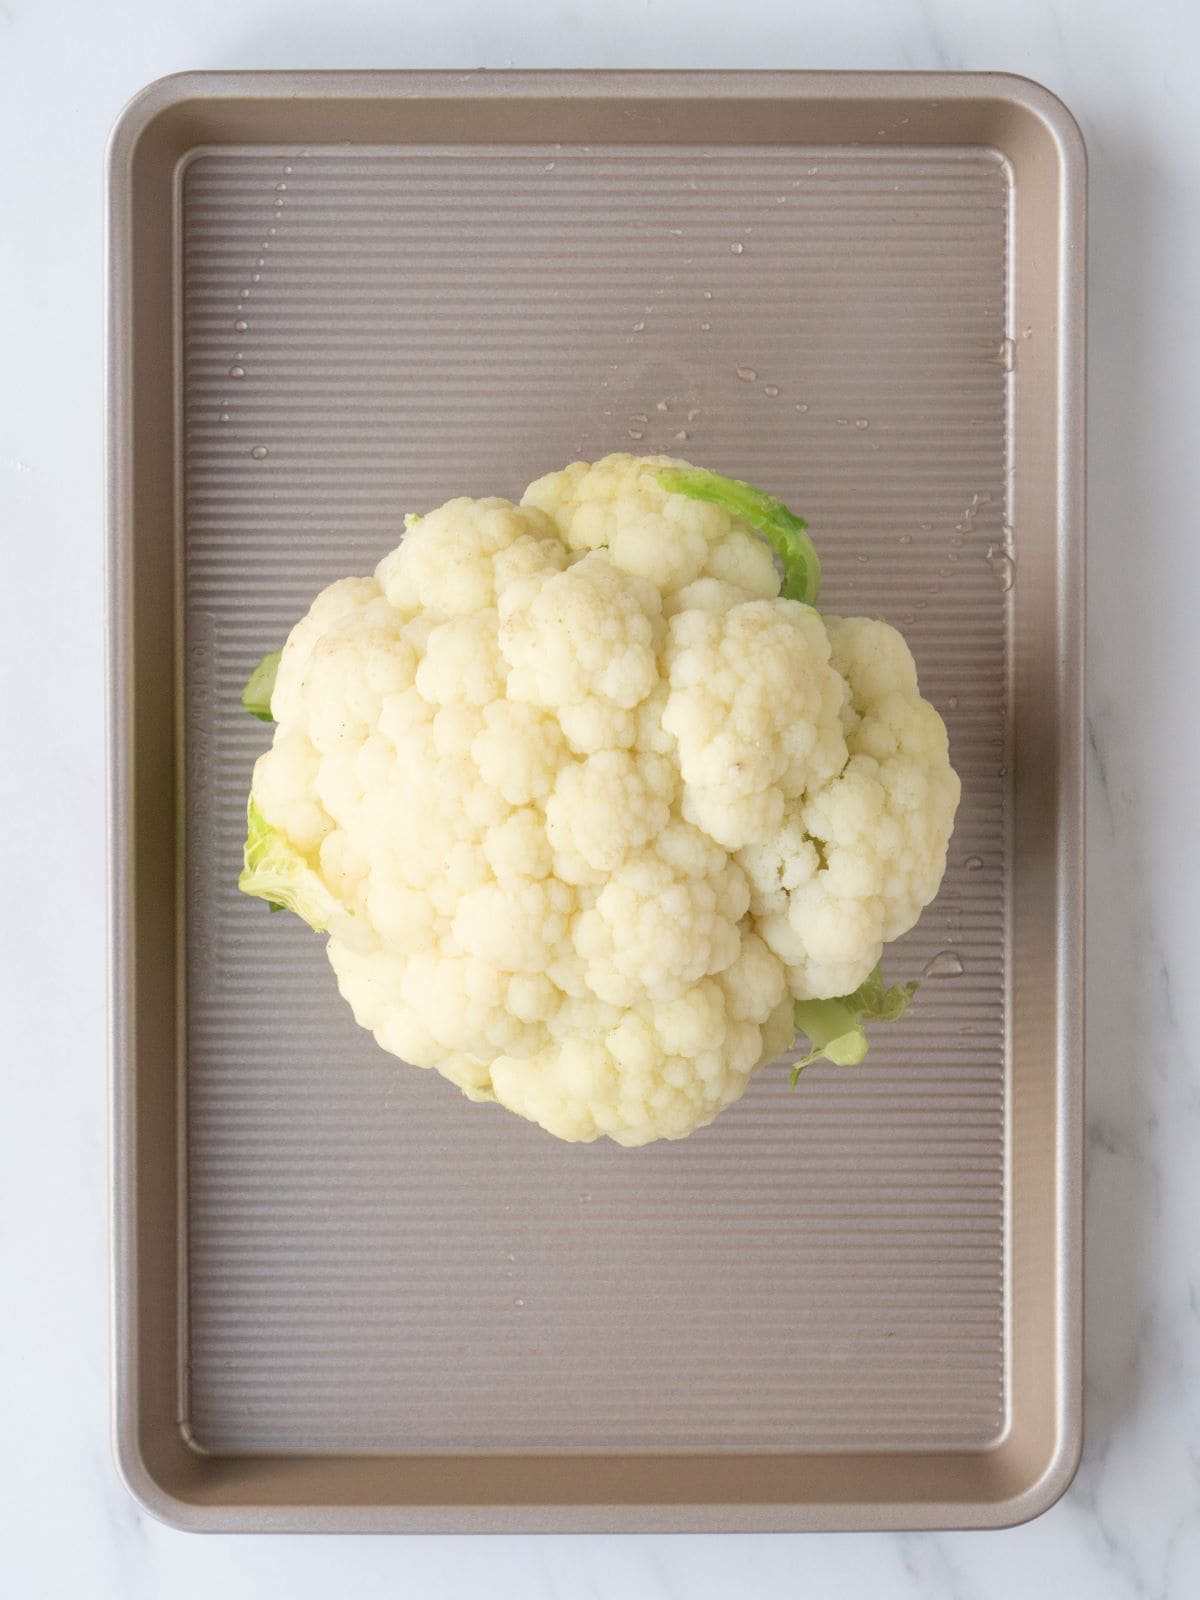 A sheet pan with a whole roasted cauliflower placed at the center, drizzled with olive oil and seasoned with salt.